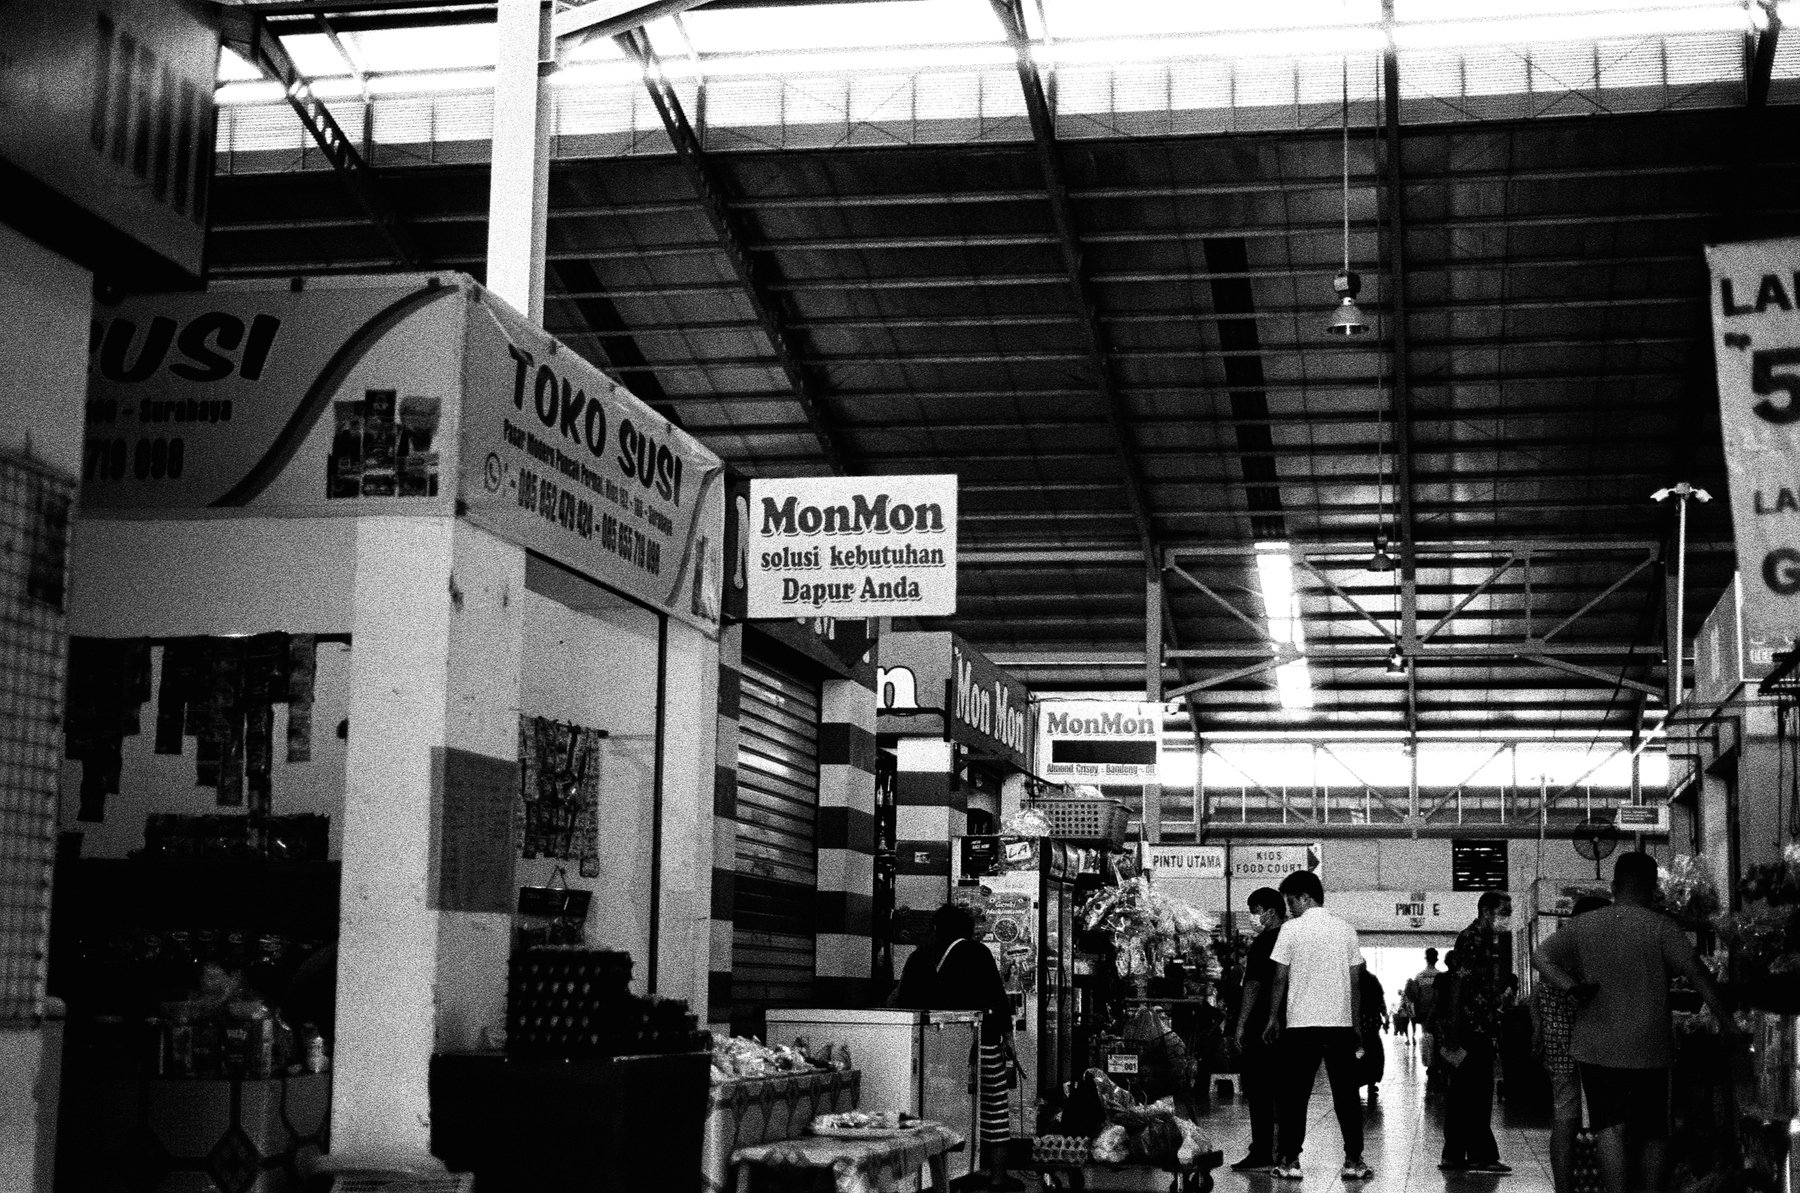 a scan of a black and white photo of the interior of a wet market in indonesia, showing many shops with indonesian signs